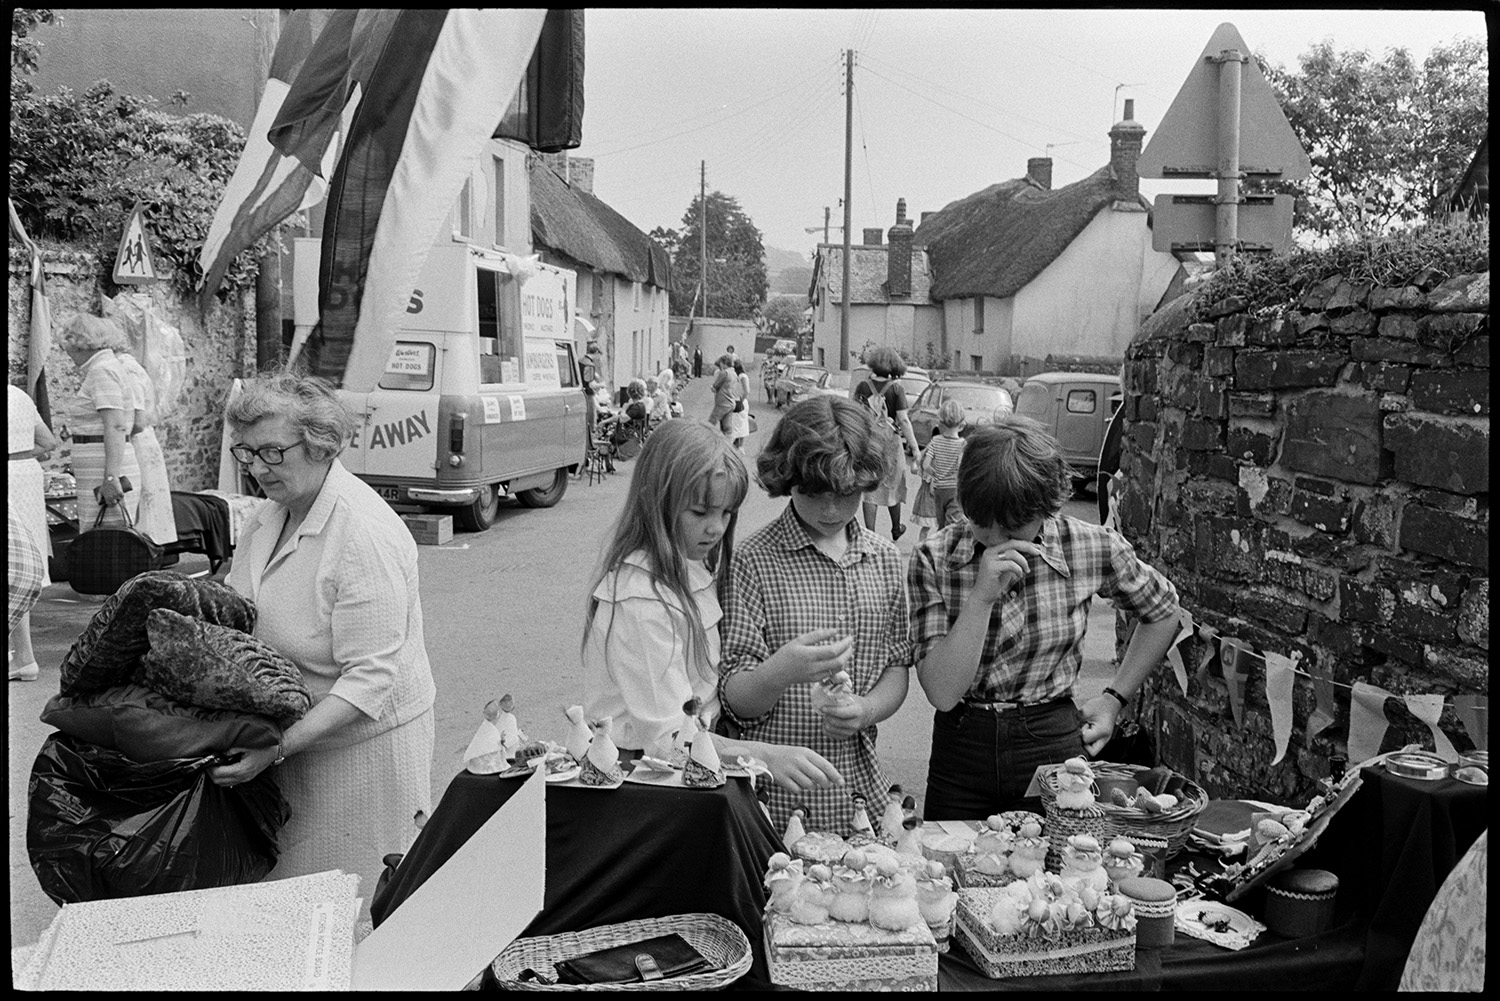 Open air market, village square part of festival, stalls, flags, crafts, books, plants. 
[Three children looking at a stall selling knitted items and small figurines at Dolton Festival or open air market. A woman is walking past with a bin bag full of cushions. The street is decorated with bunting and flags, and a hot dog van can be seen in the background.]